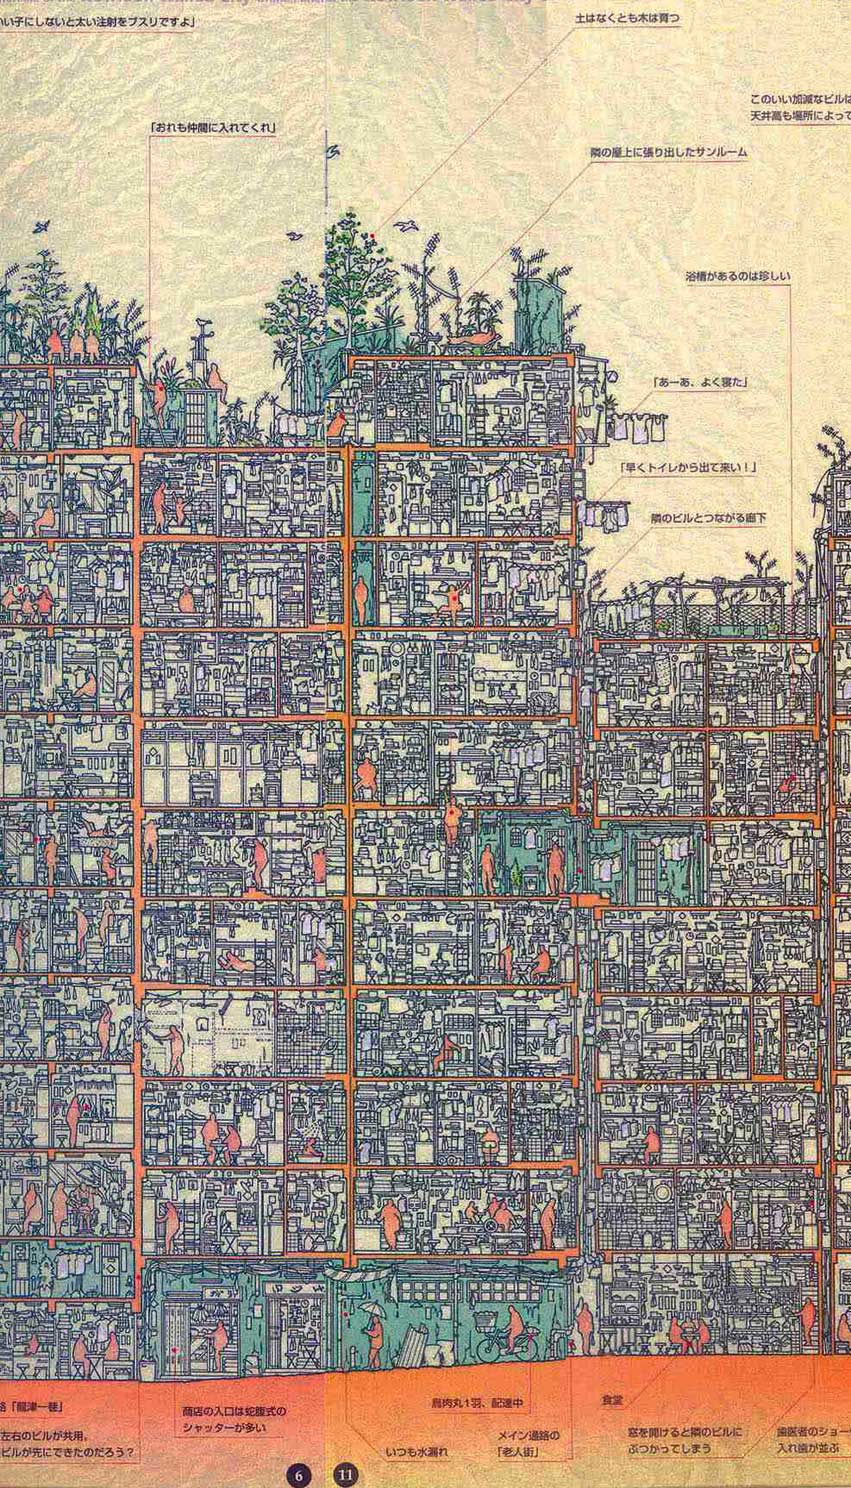 kowloon Walled City cross-section view